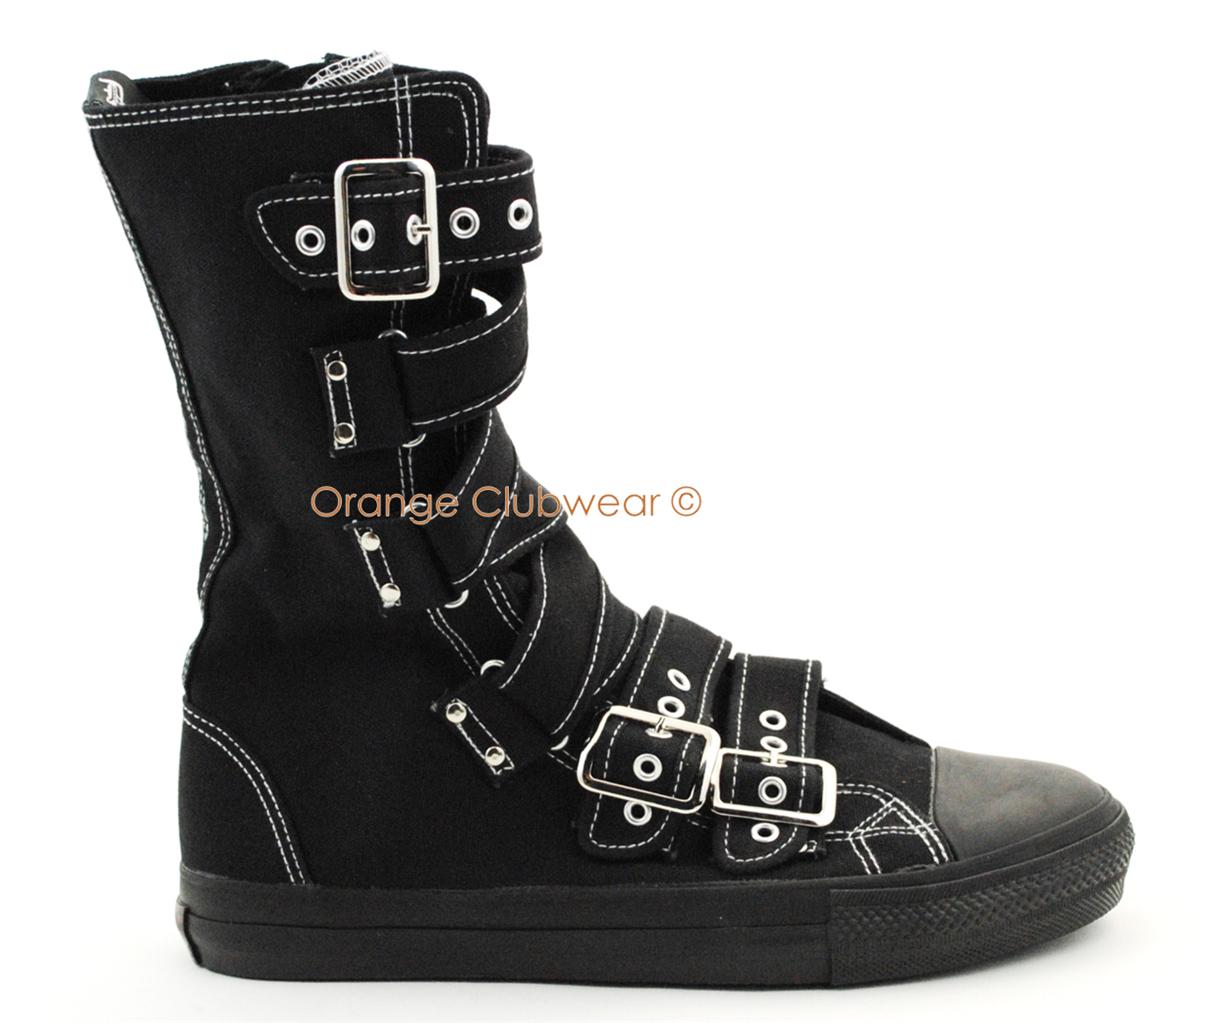 DEMONIA Mens Goth Punk Sneakers Calf Boots Buckle Shoes | eBay